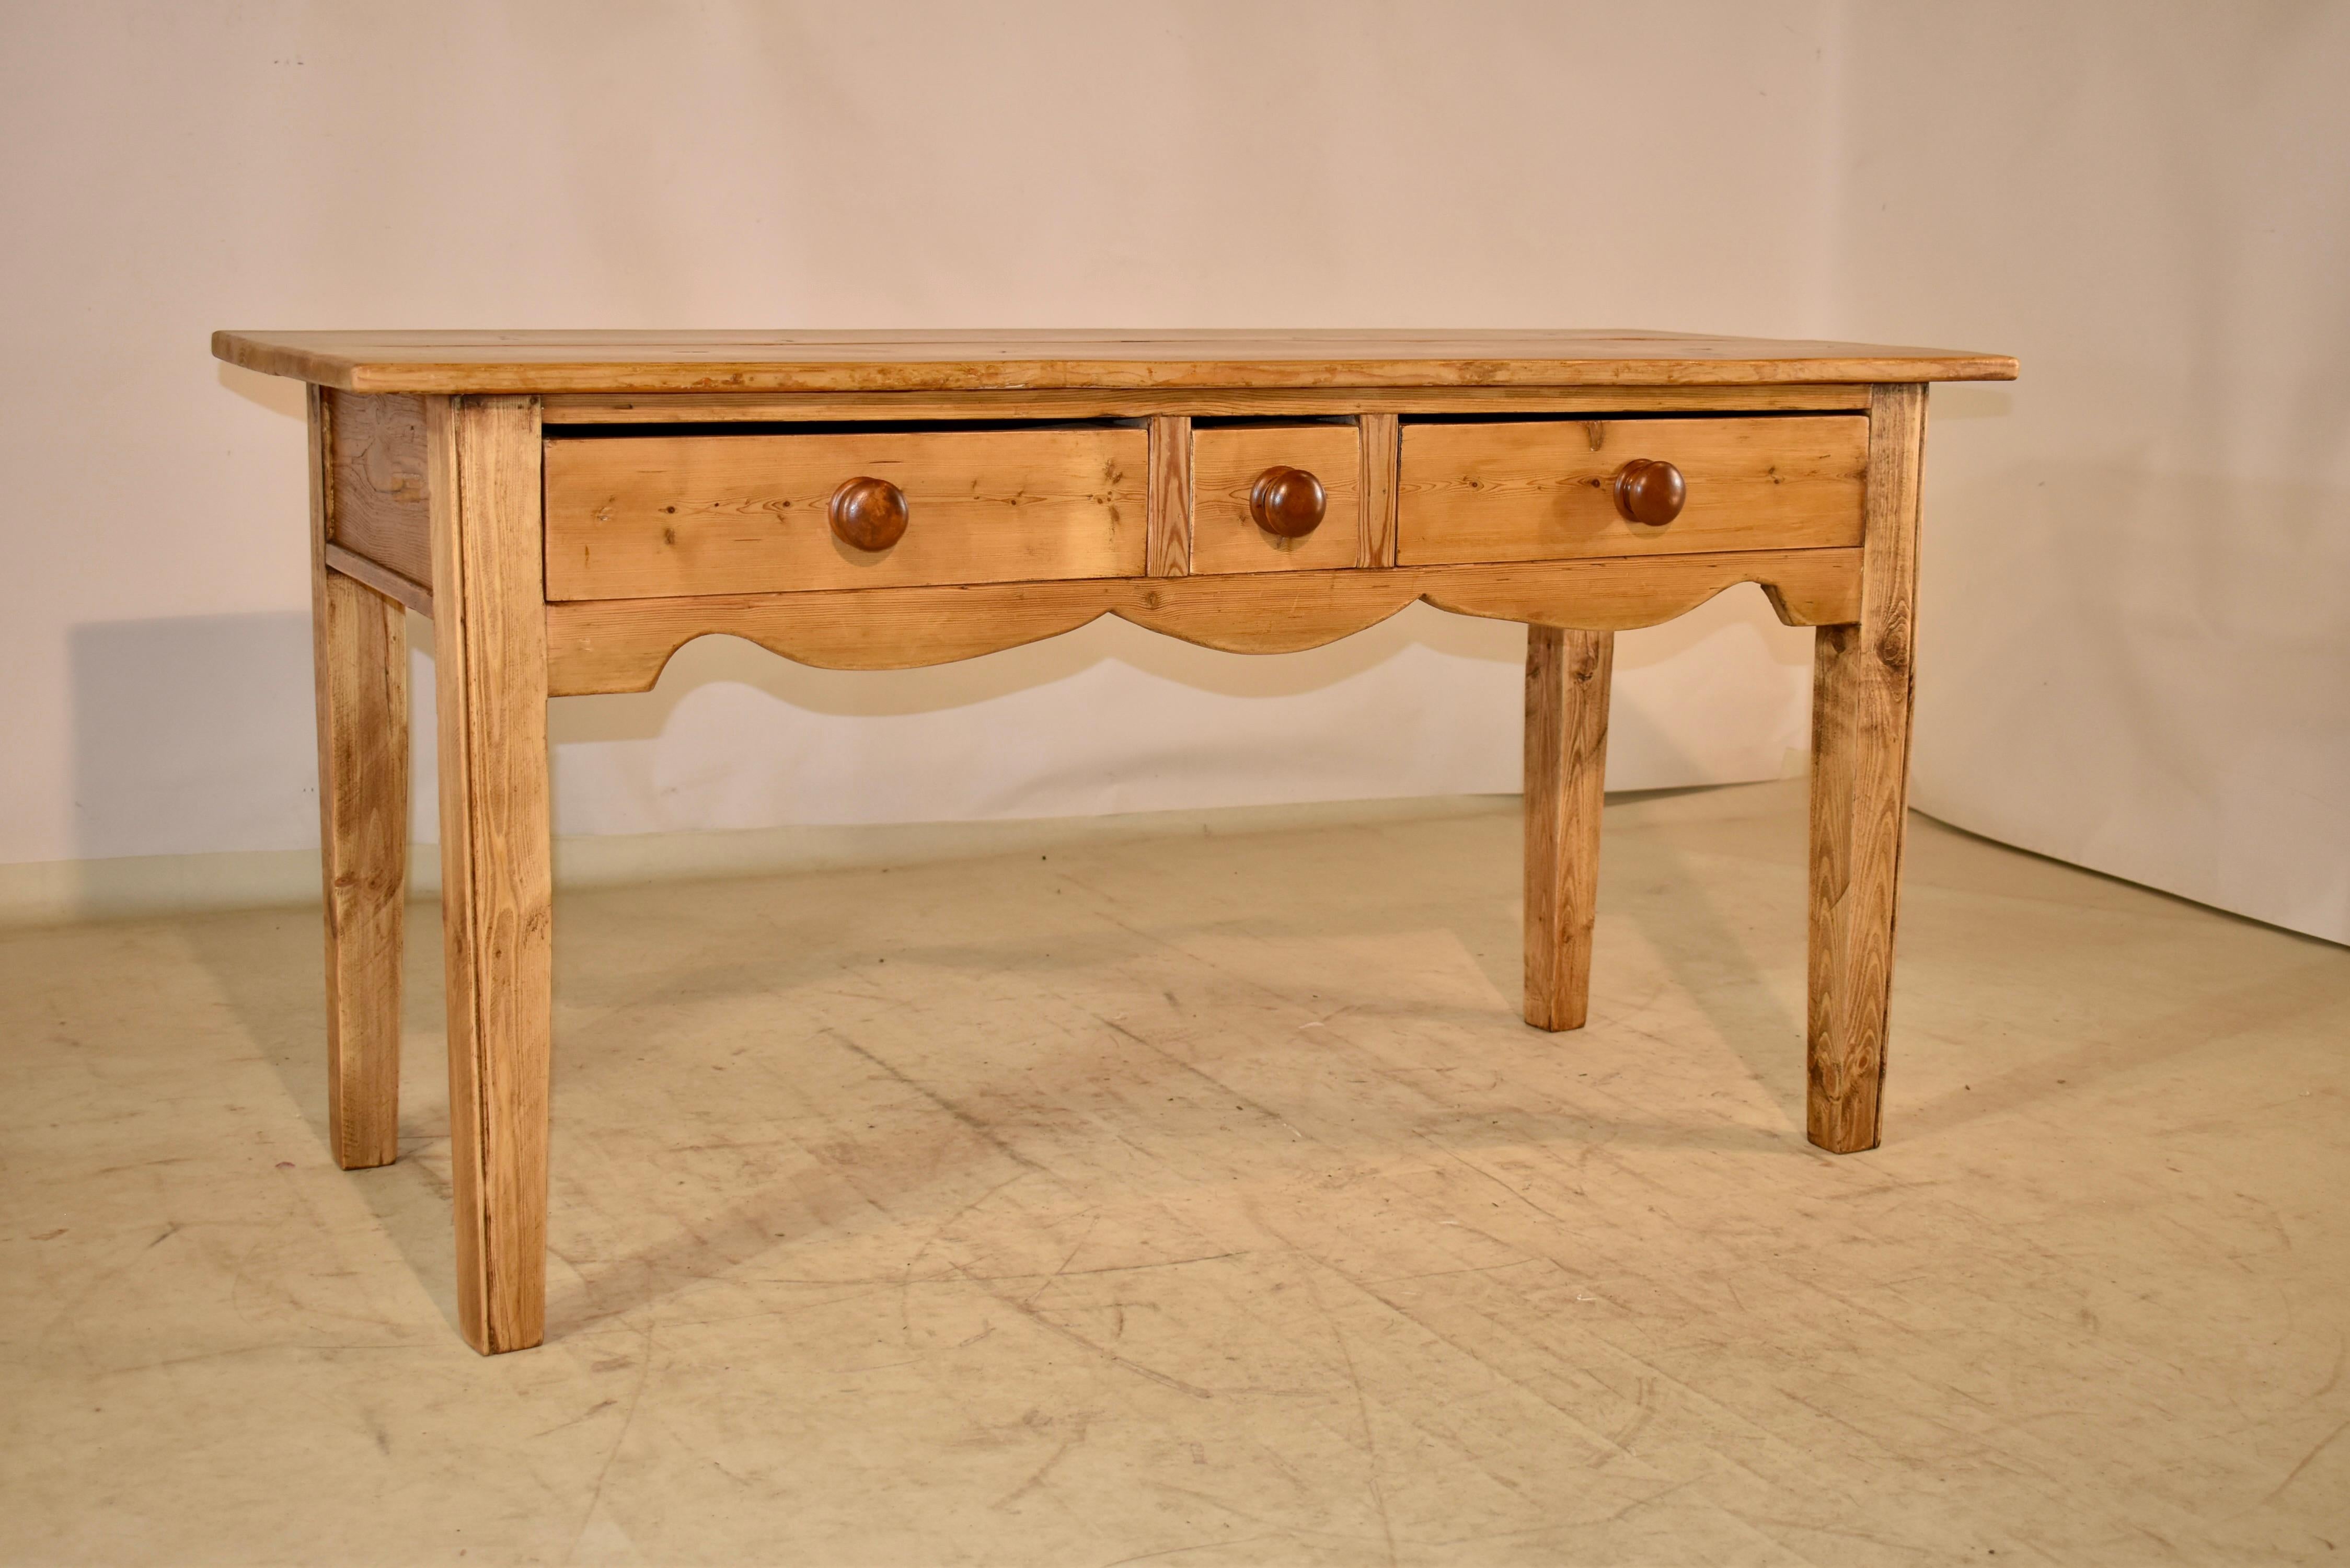 19th century pine sideboard from England with a two plank top over simple sides and three drawers in the front. There is a scalloped apron beneath the drawers and the piece is raised on simple tapered legs. This is a great piece with lots of